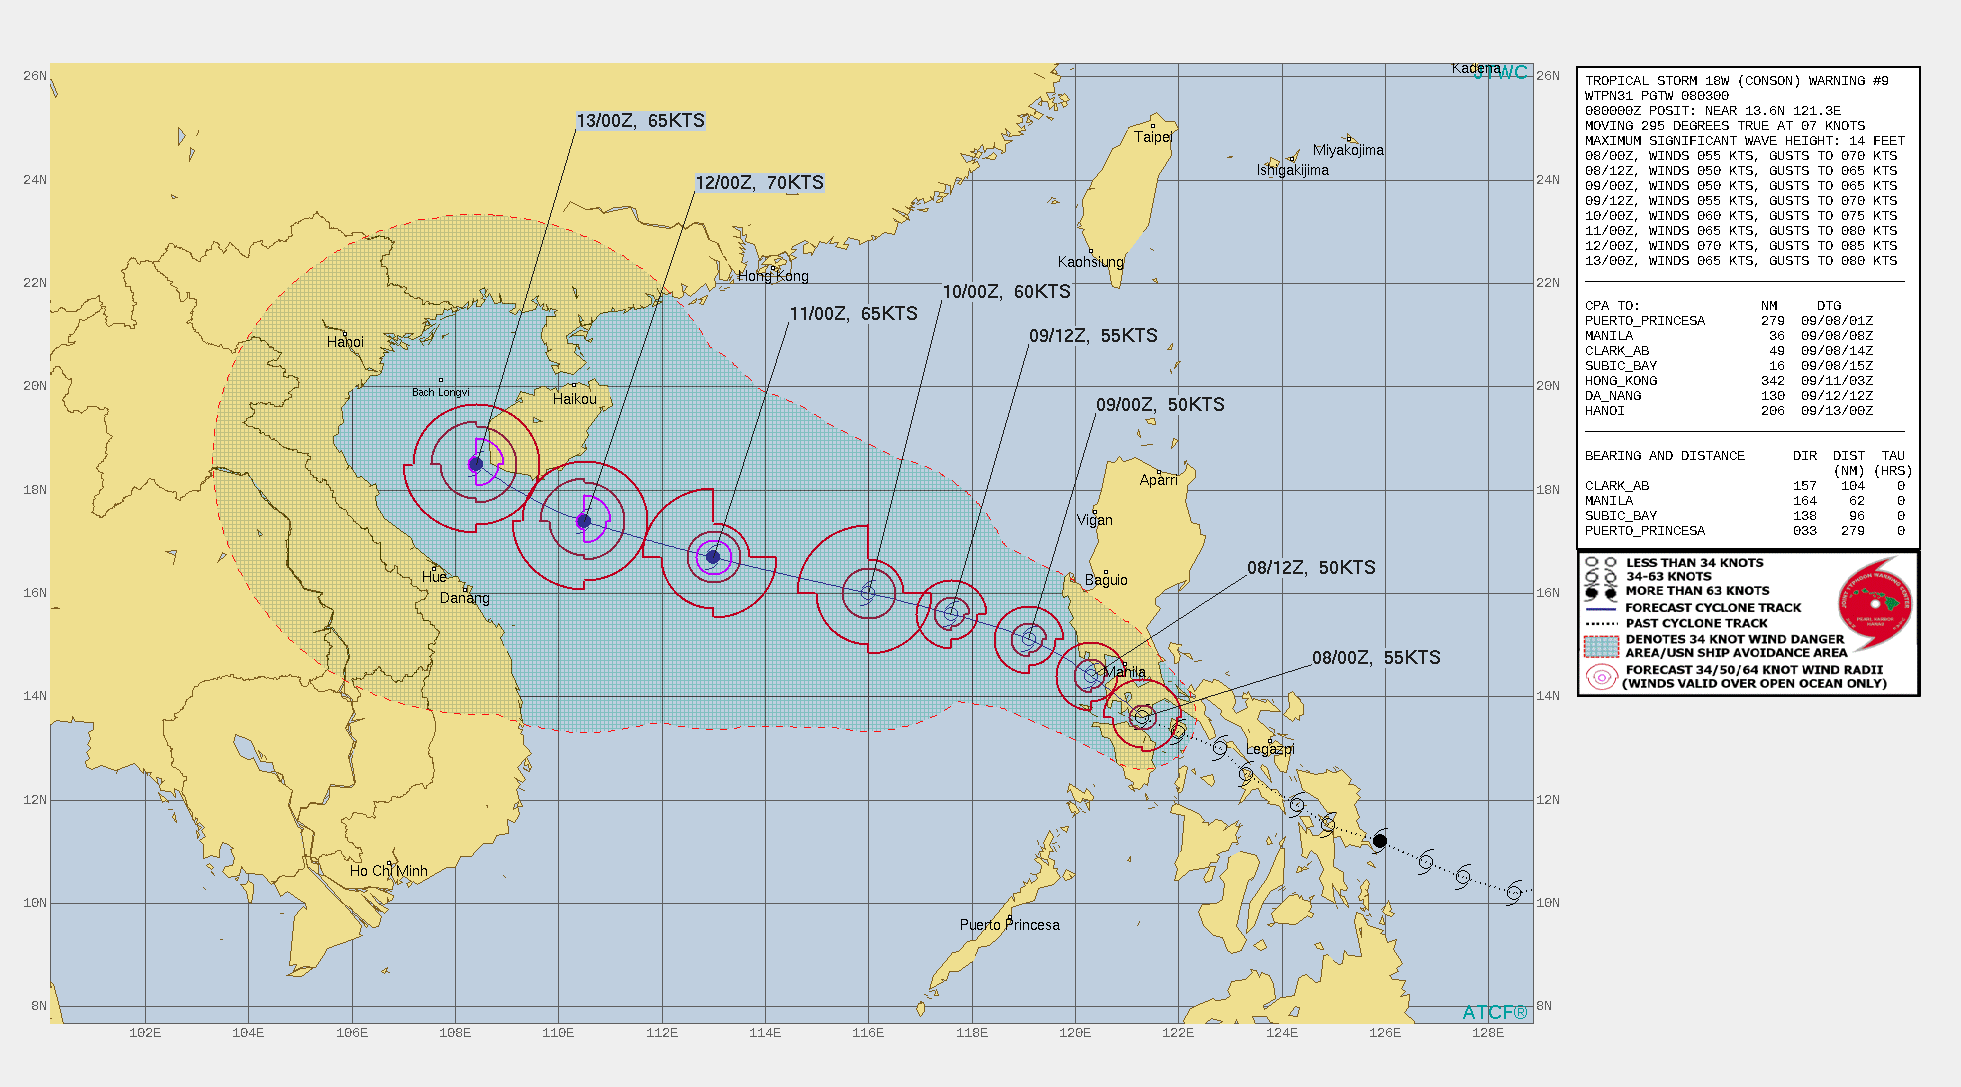 TS 18W(CONSON). WARNING 9 ISSUED AT 08/03UTC.THERE ARE NO SIGNIFICANT CHANGES TO THE FORECAST FROM THE PREVIOUS WARNING.  FORECAST DISCUSSION: TS 18W IS FORECAST TO WEAKEN SLIGHTLY TO 50 KNOTS AS IT TRACKS NORTHWESTWARD OVER SOUTHERN LUZON. AFTER 24H, THE SYSTEM WILL GRADUALLY STRENGTHEN OVER THE SOUTH CHINA SEA AS IT TRACKS WESTWARD TO WEST-NORTHWESTWARD TOWARD HAINAN ISLAND. THERE IS A LOW PROBABILITY THAT WEAK INTERACTION AND POSSIBLY MINOR TRACK CHANGES MAY OCCUR AFTER 48H AS TS 18W CLOSES WITHIN ABOUT 900KM OF TY 19W AT 60H.